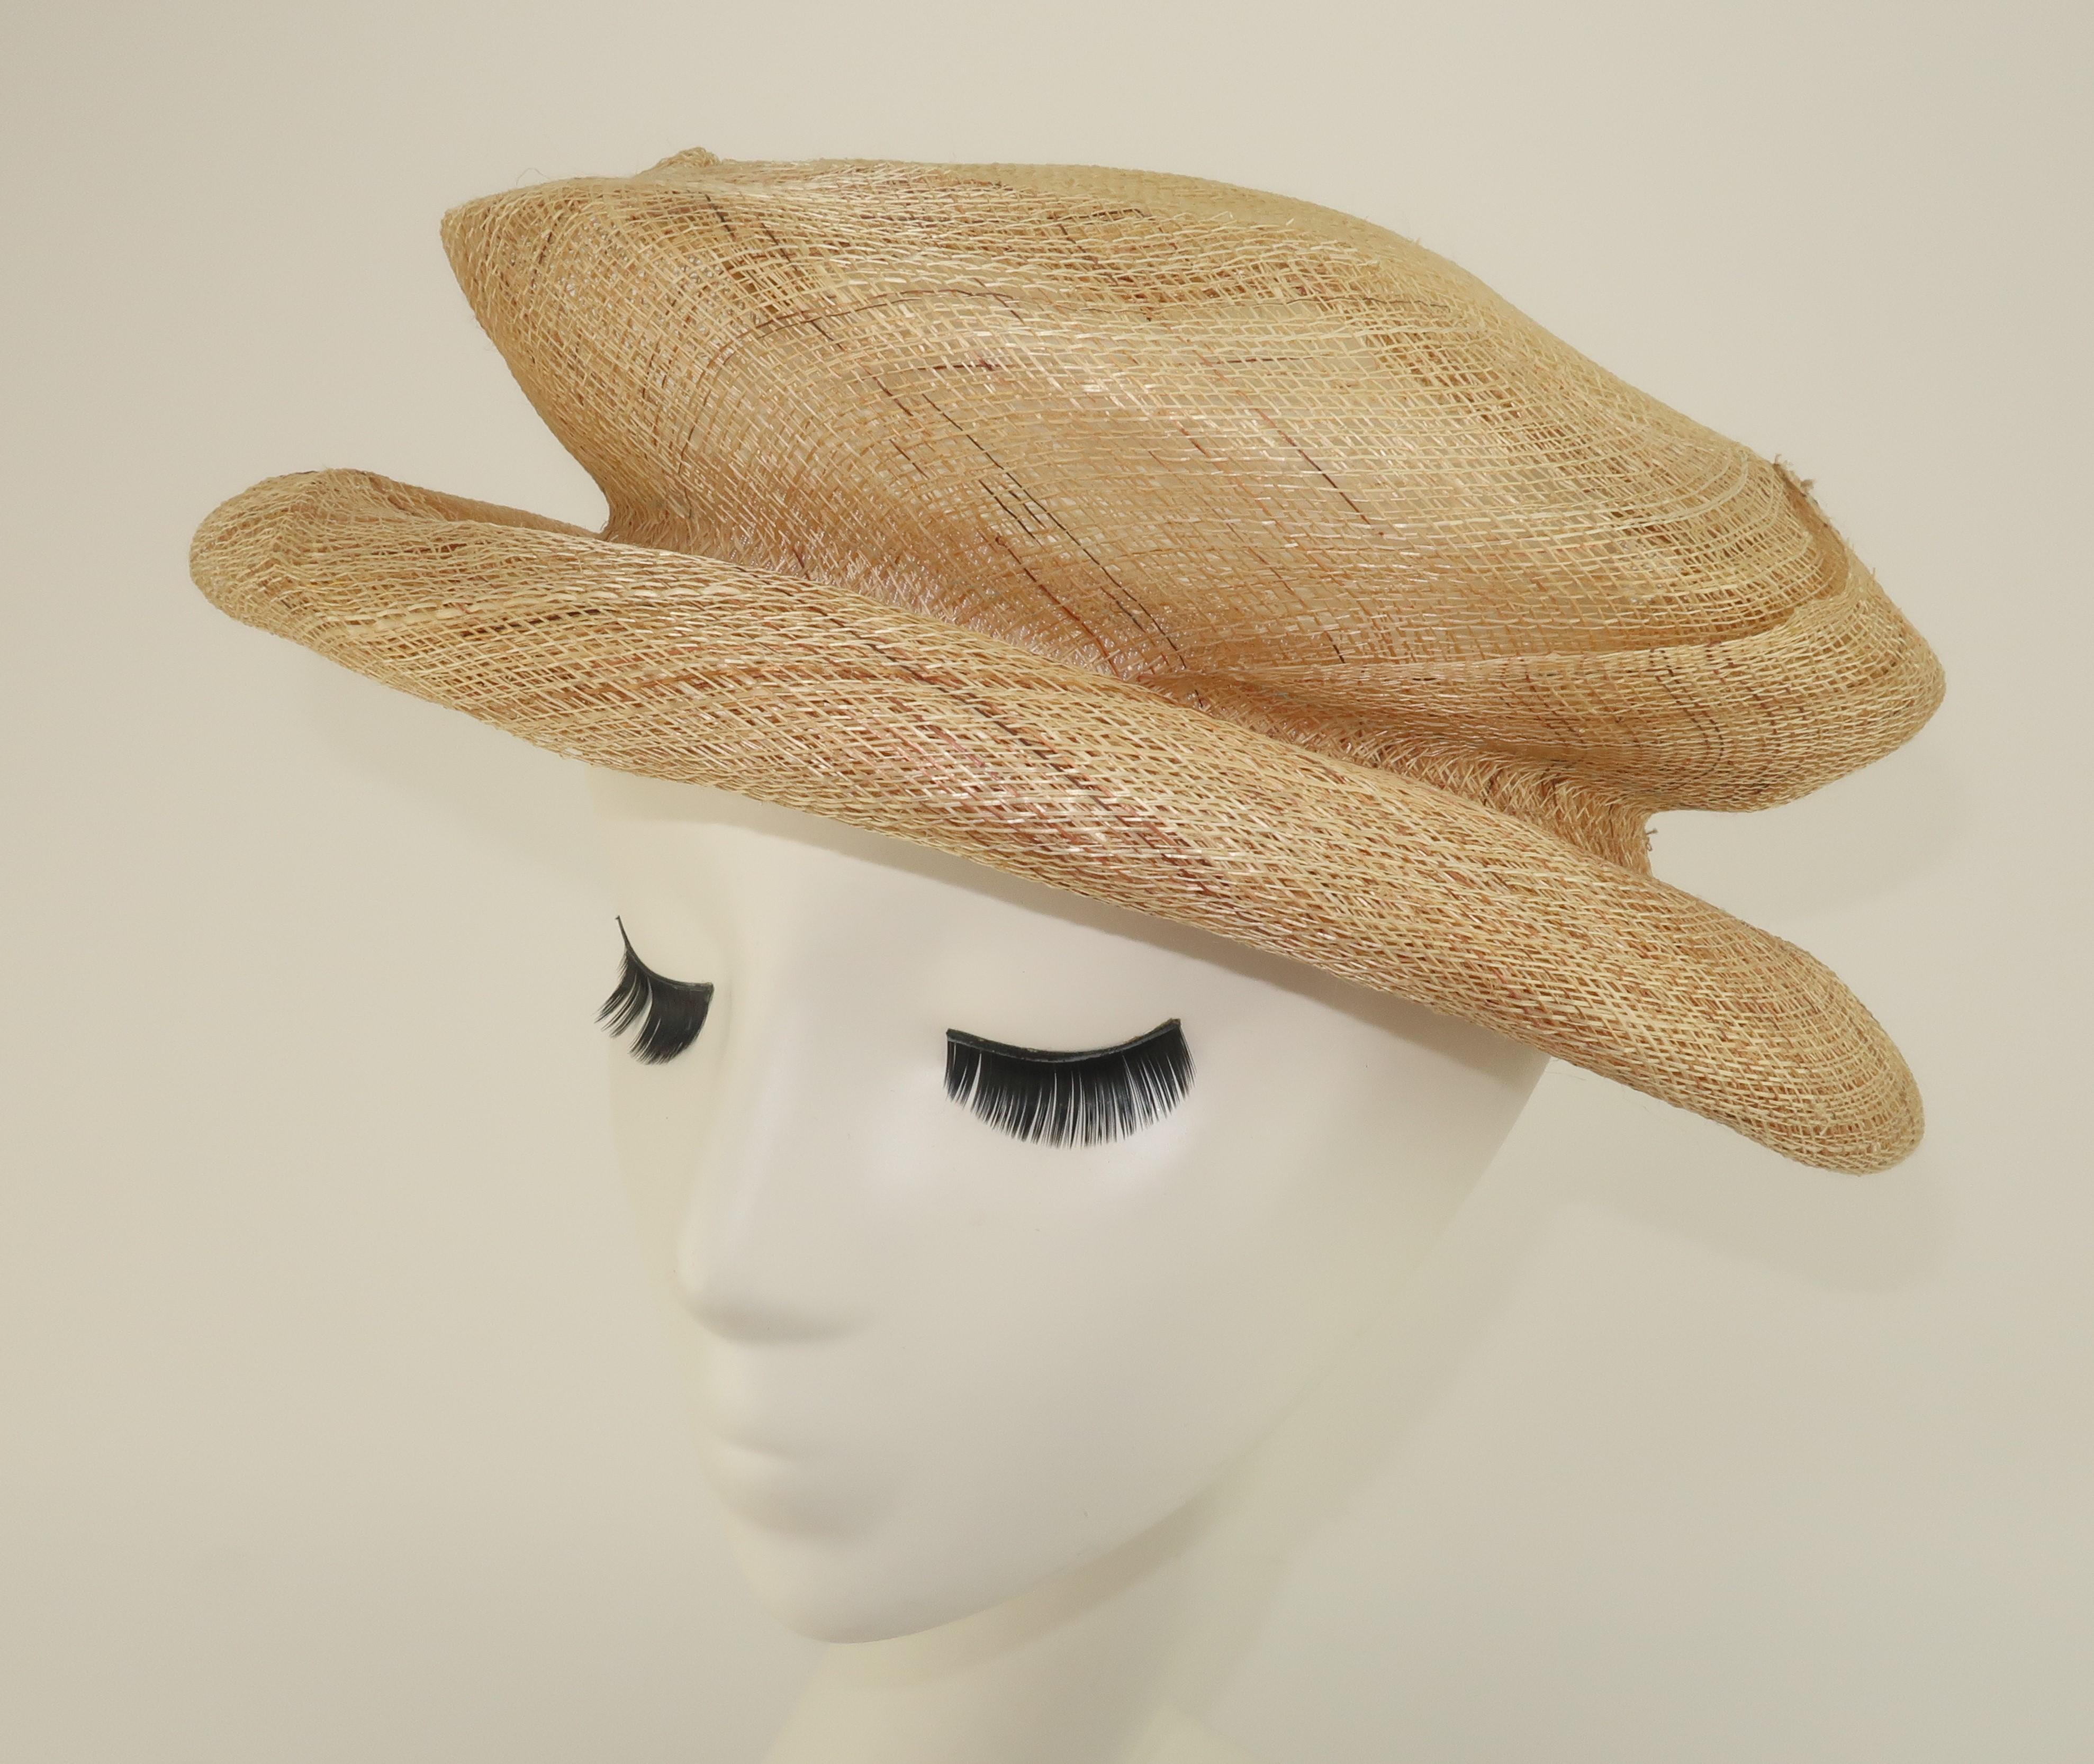 1990's Saks Fifth Avenue Italian straw hat with a nod to a Renaissance style silhouette.  The natural straw has a light open weave and is expertly constructed to provide a springy fit that can be worn with the rim pulled down or left up somewhat